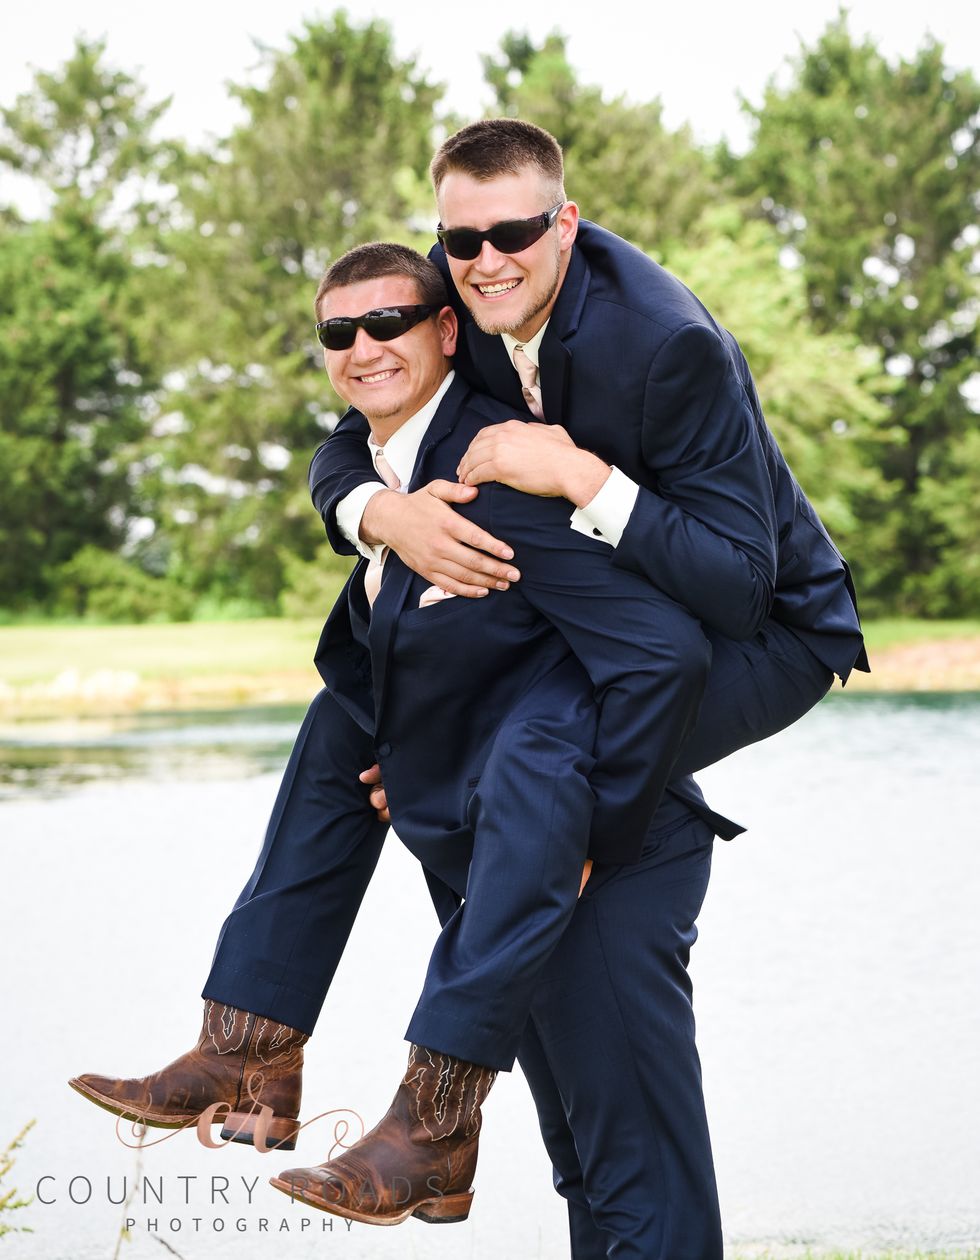 Photograph, Suit, Formal wear, Footwear, Romance, Photography, Tuxedo, Ceremony, Muscle, Event, 